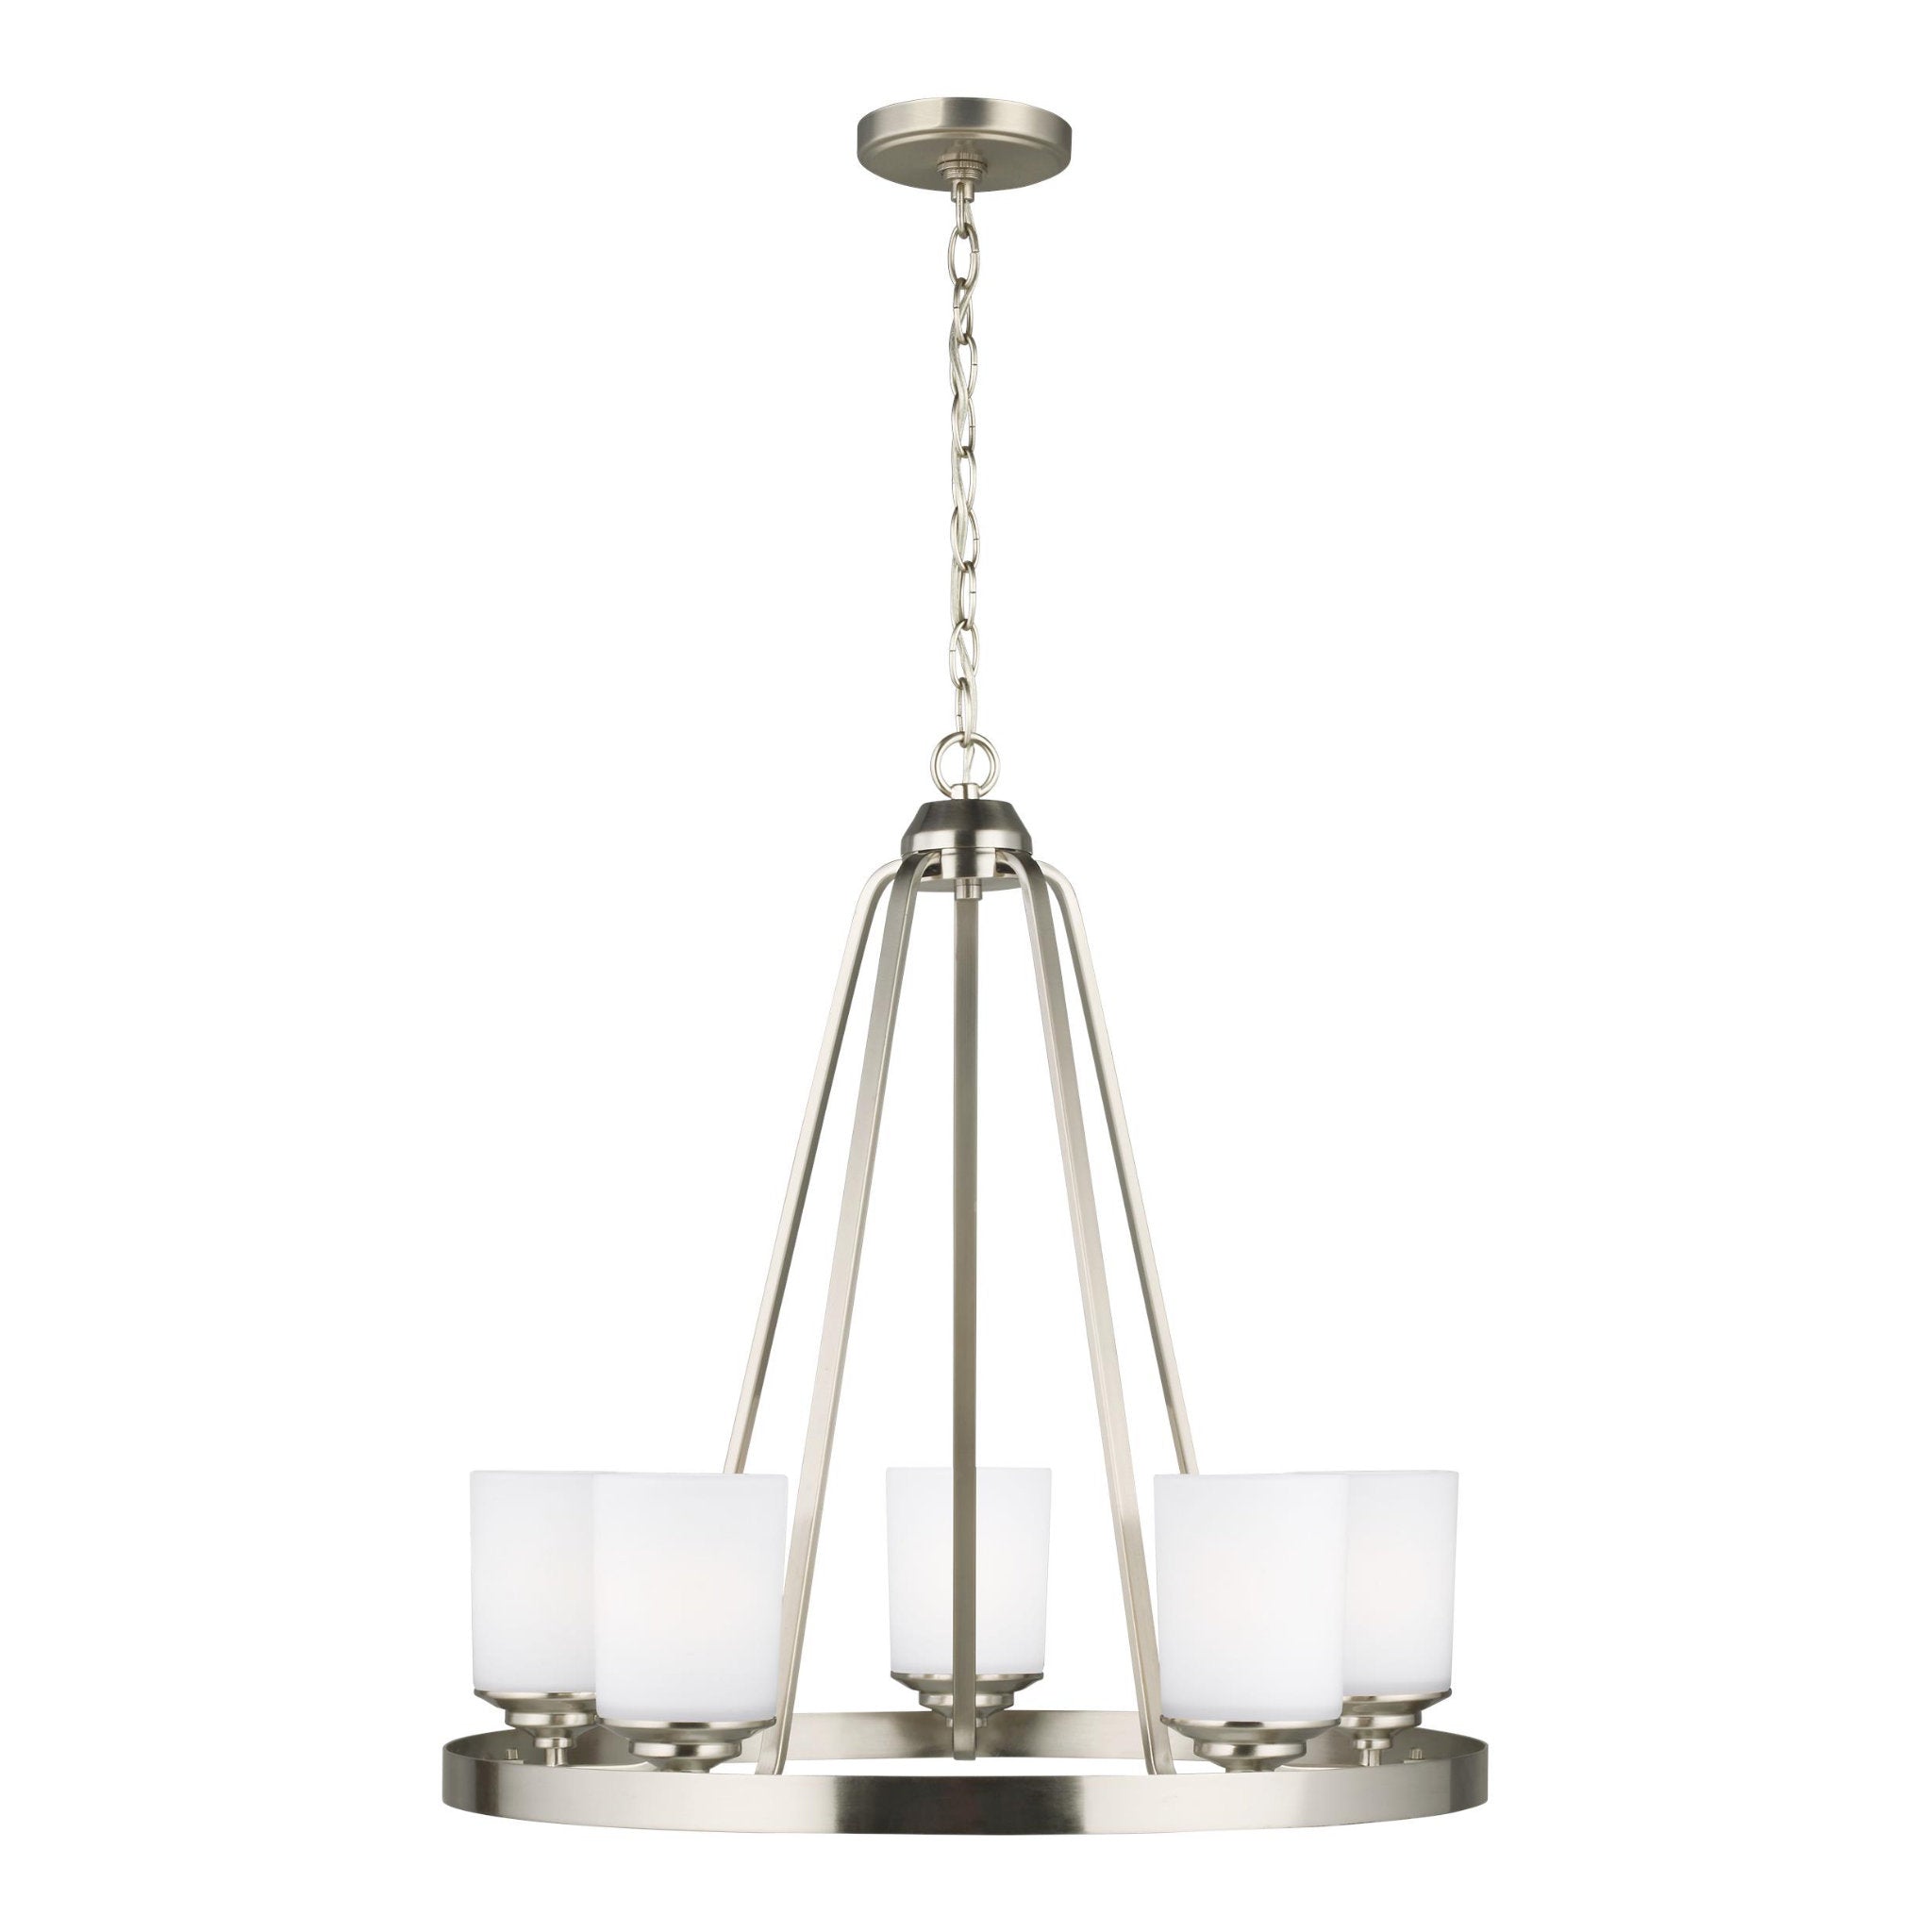 Kemal Five Light Chandelier Transitional 24" Height Steel Round Etched / White Inside Shade in Brushed Nickel